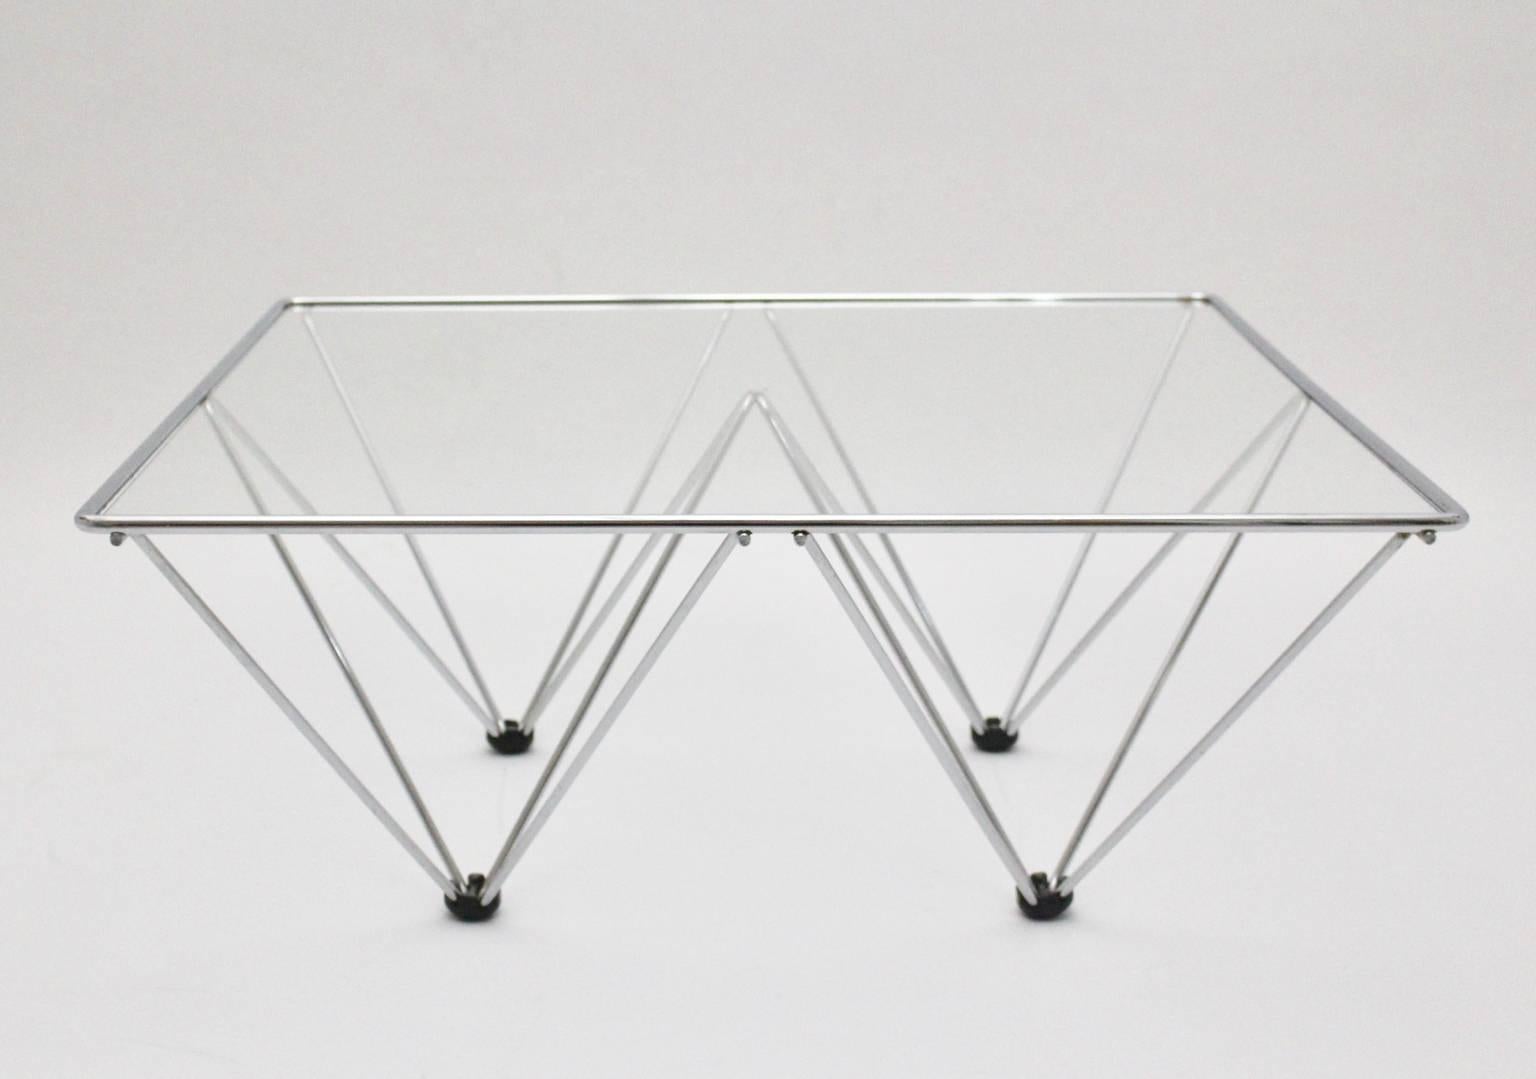 The frame of the coffee table is made of chromed tube steel shaped in square form with black plastic sabots.
A clear glass top with no spots created a lightweight, elegance appearance.

The condition is very good and the coffee table is ready to